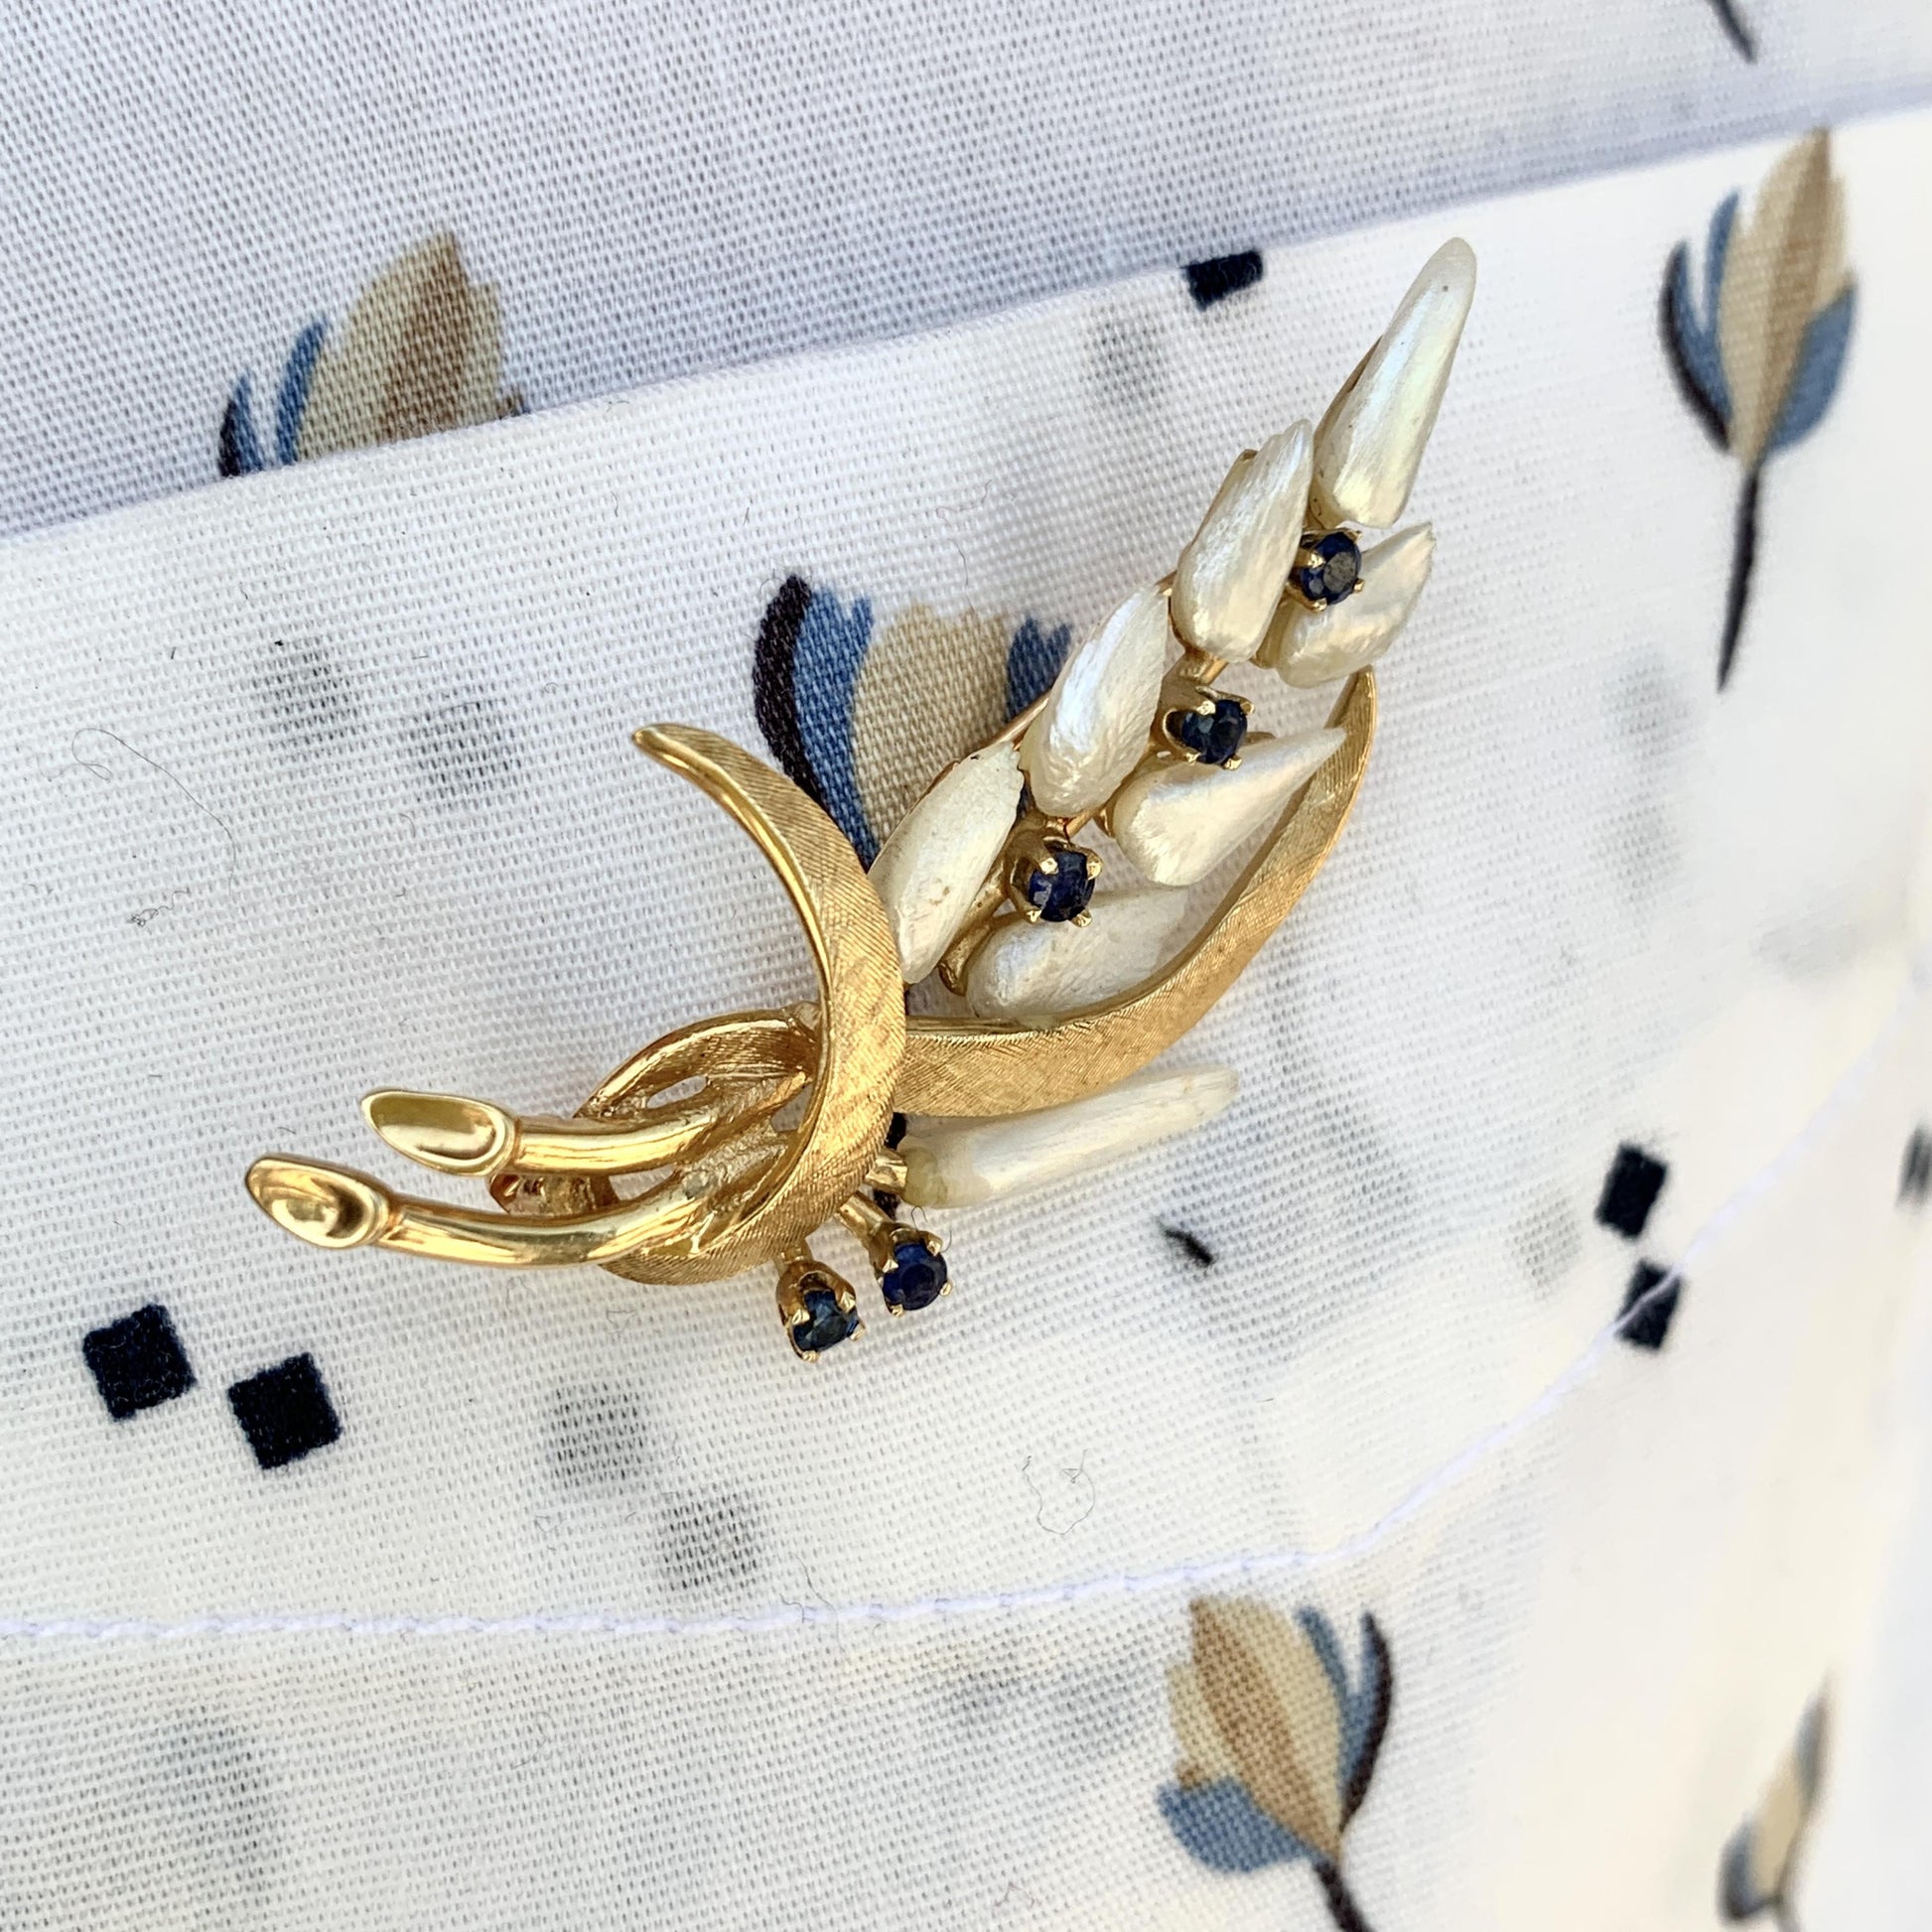 0.30 cttw Blue Sapphire & Mississippi Pearl Brooch in 14K Yellow Gold